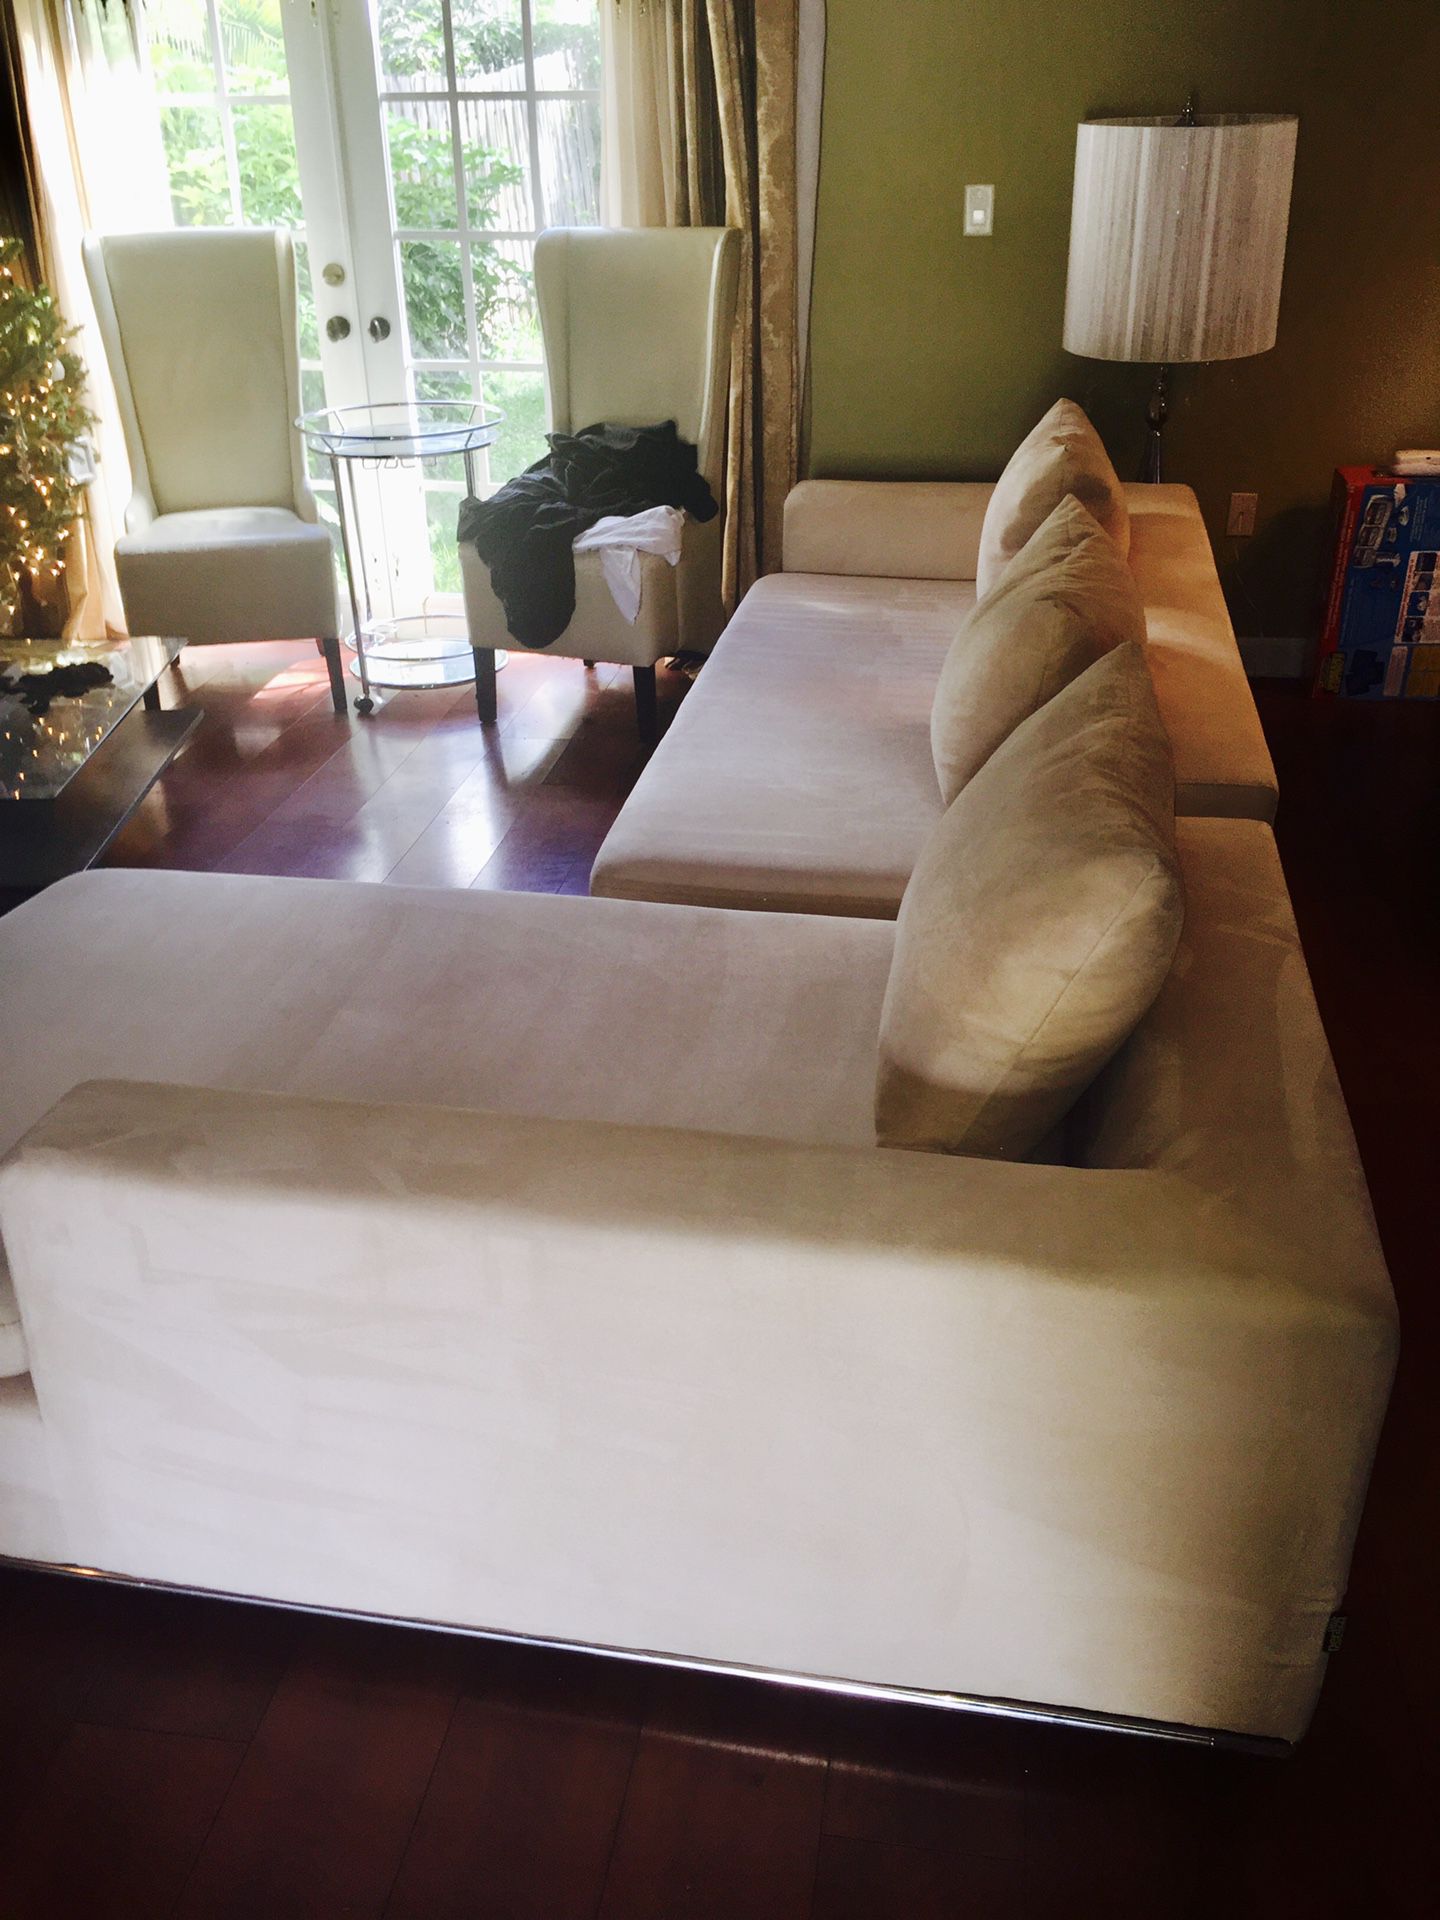 City Furniture Treated Microfiber Sectional with Coffee Table for sale-$400